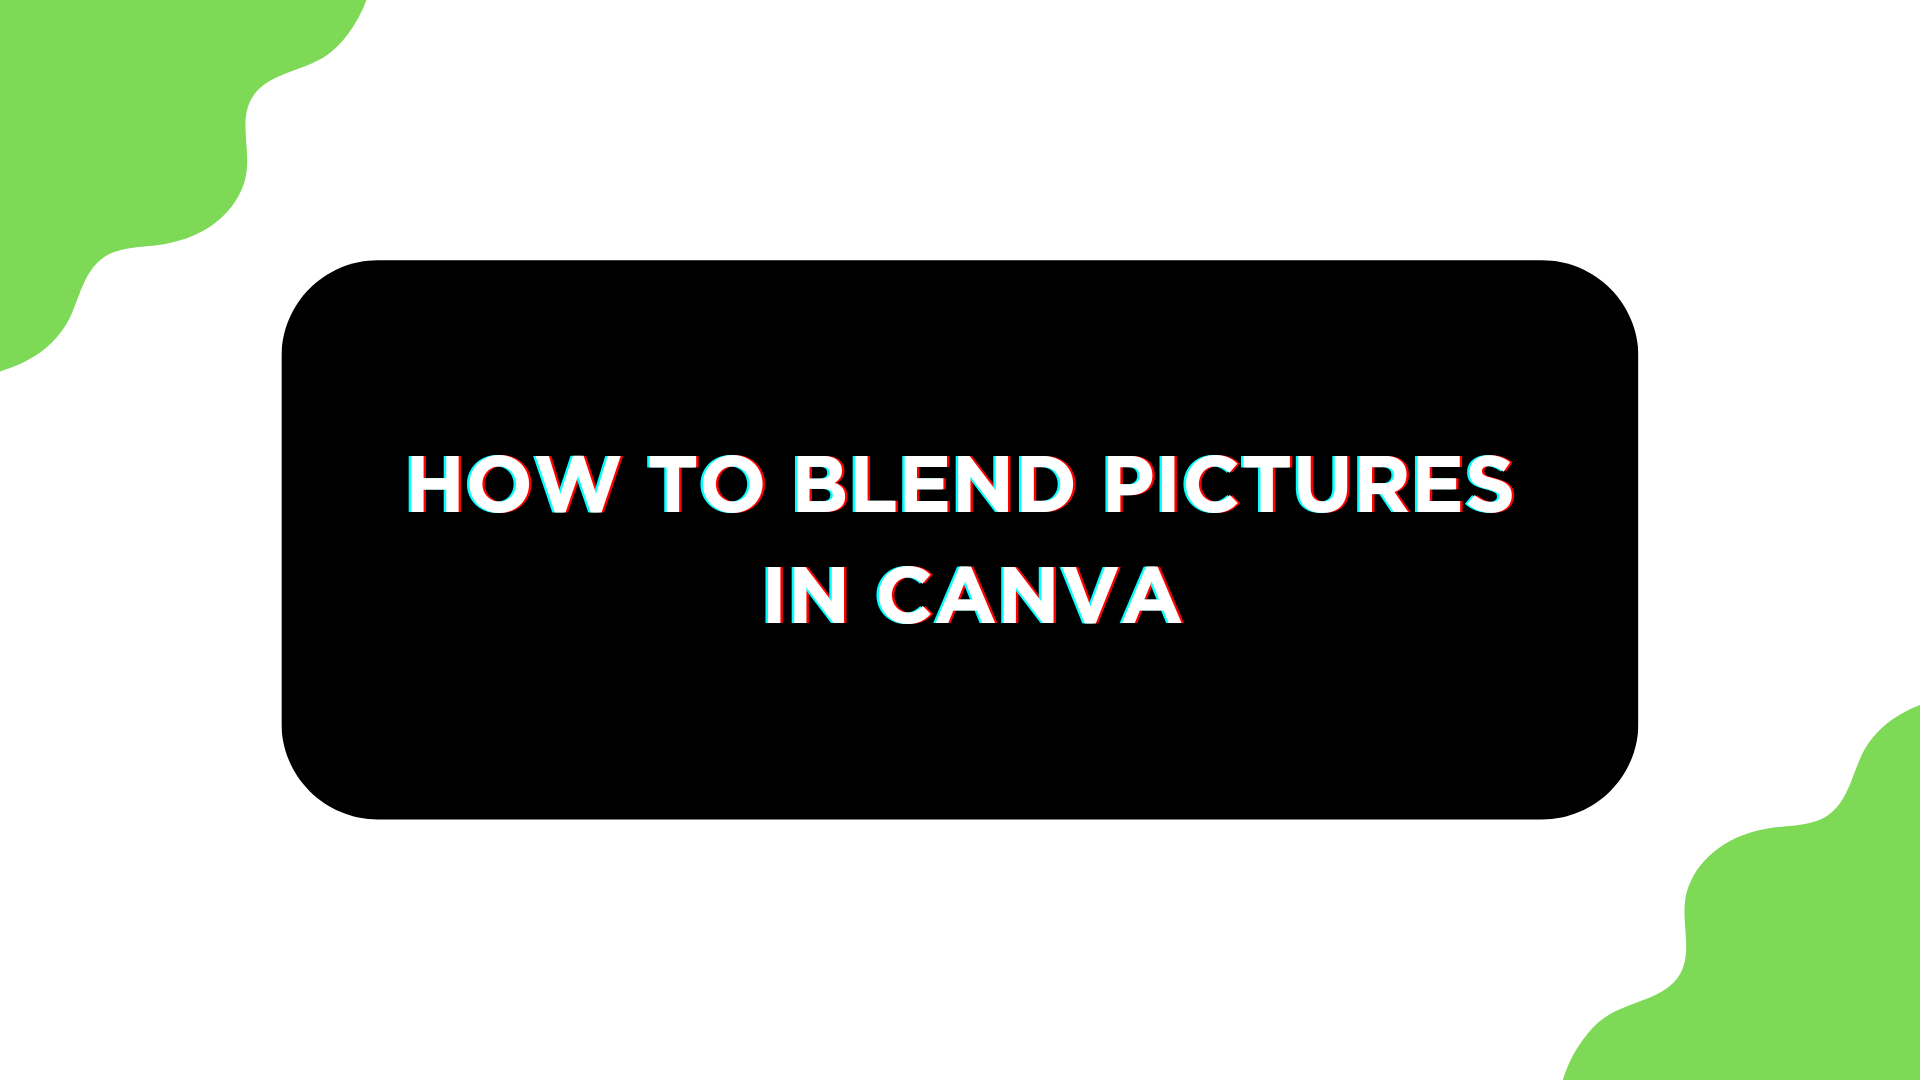 How To Blend Pictures in Canva - Pttrns